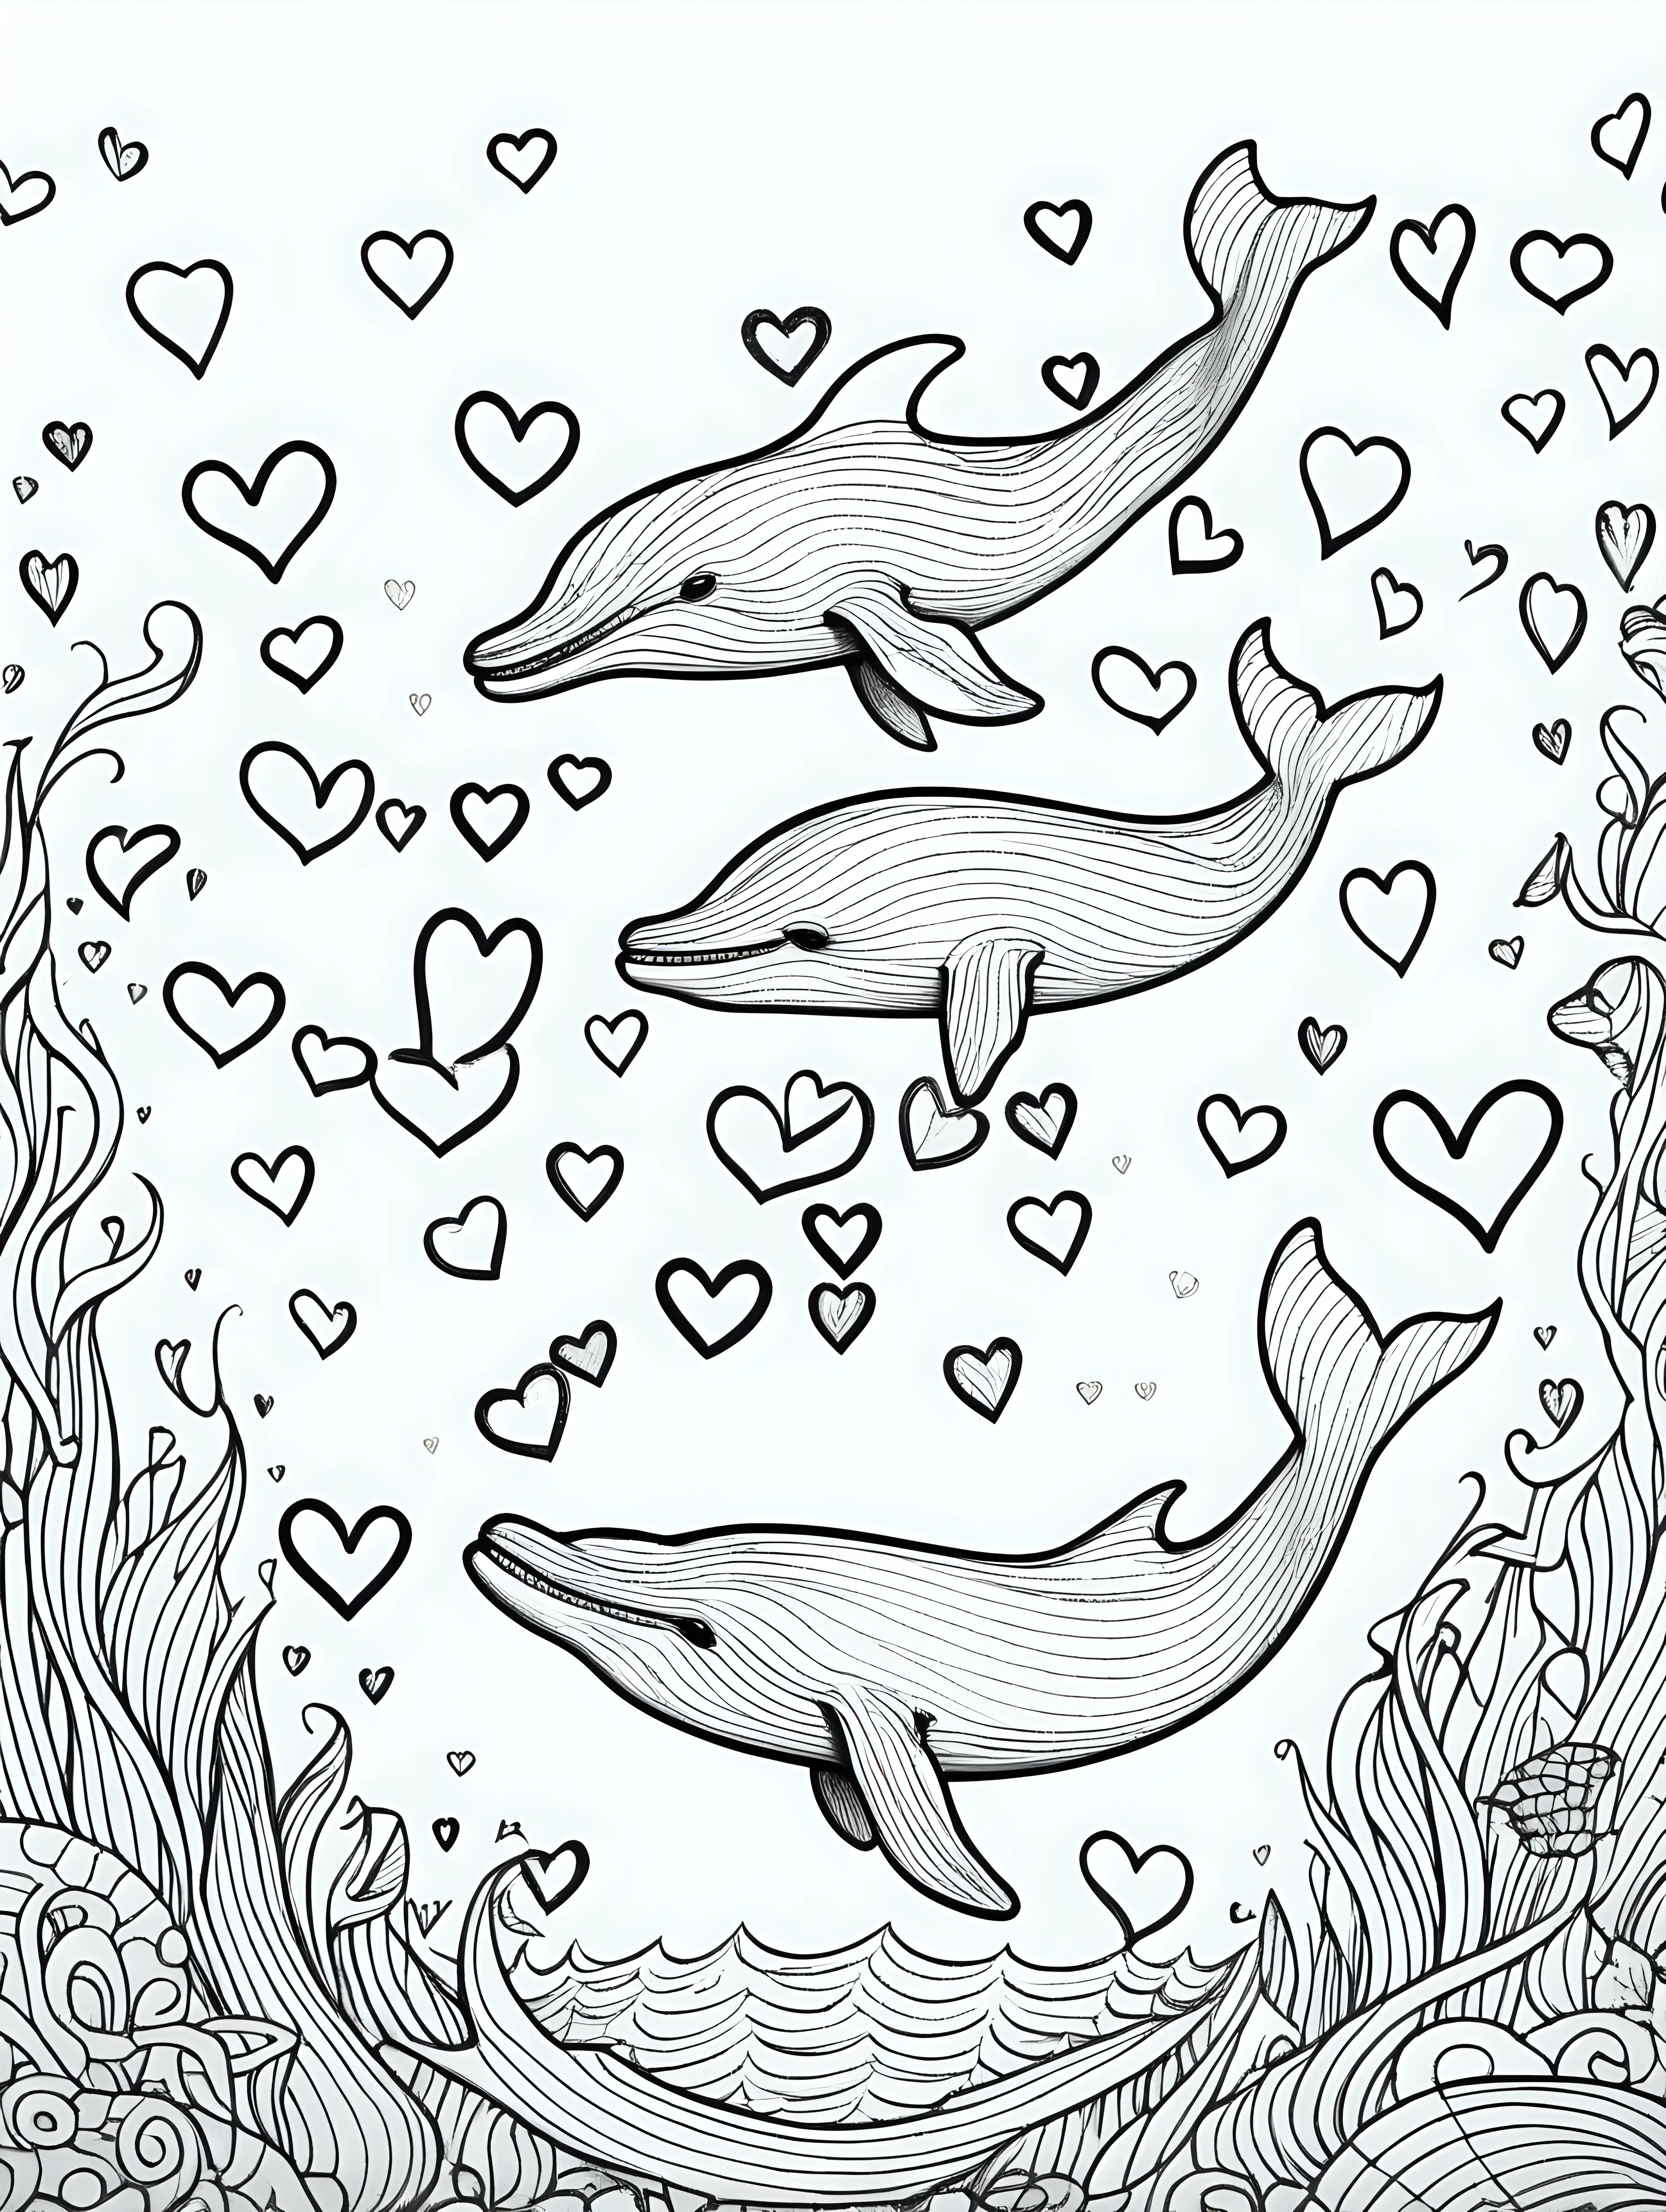 create a black line detailed sketch illustration coloring page of cute whales in the ocean surrounded with hearts, crisp black outlines, no shading